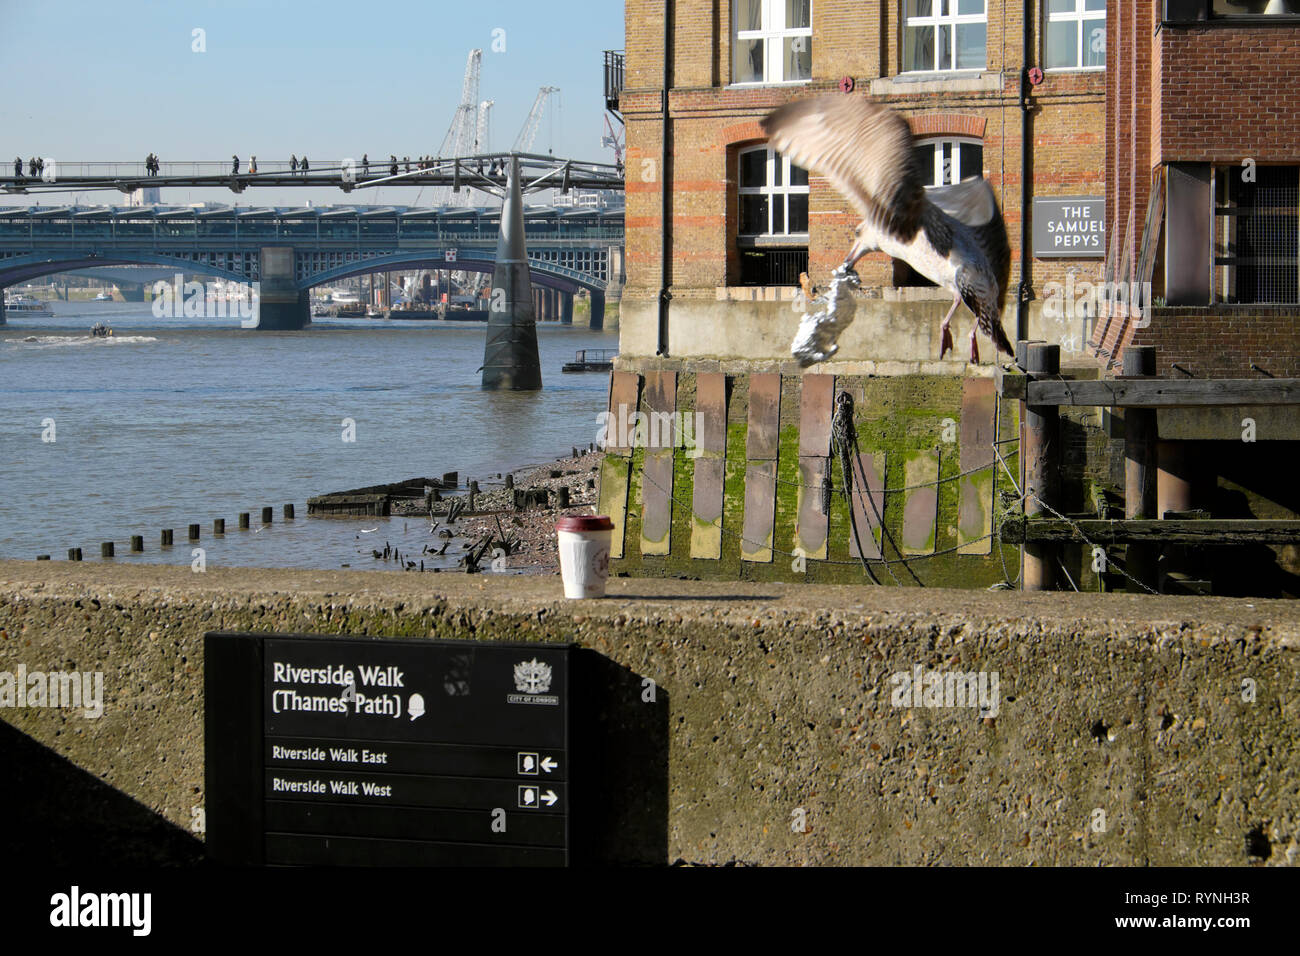 A seagull in flight snatching food scraps from a sandwich in tinfoil and view of Millennium Bridge over River Thames London England UK  KATHY DEWITT Stock Photo